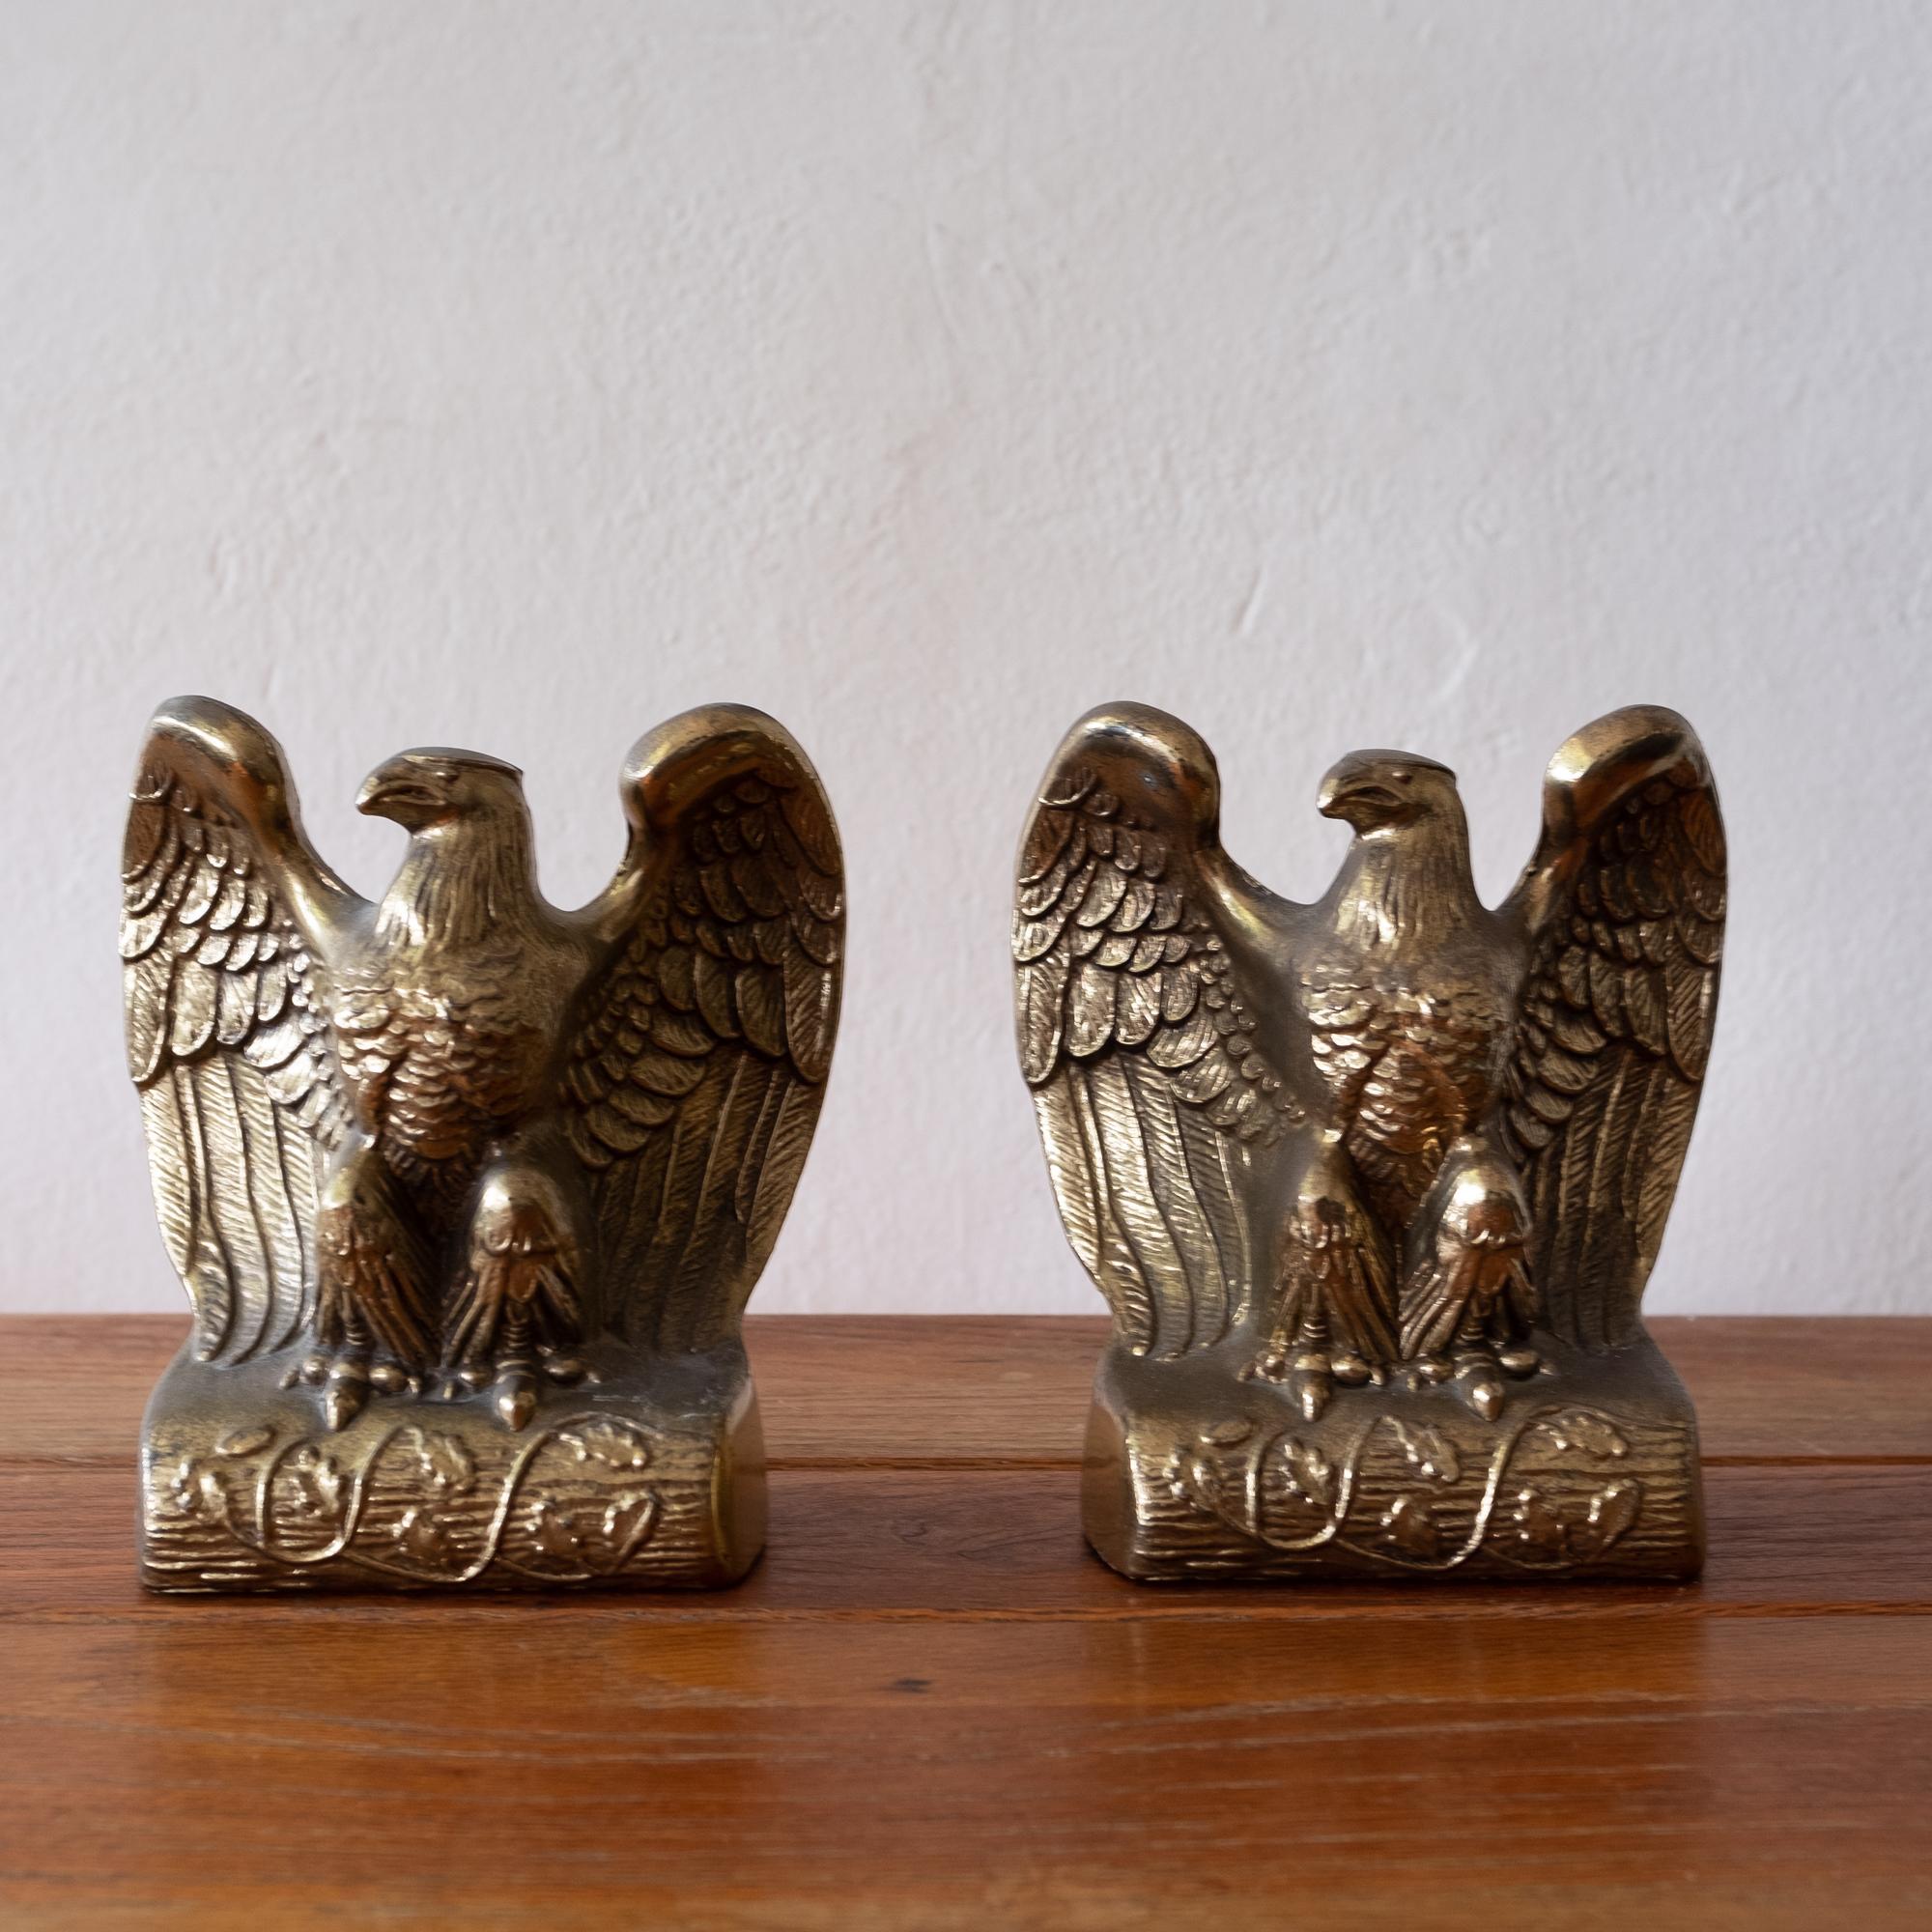 Brass American bald eagle bookends from the 1950s. Good weight with original green felt.